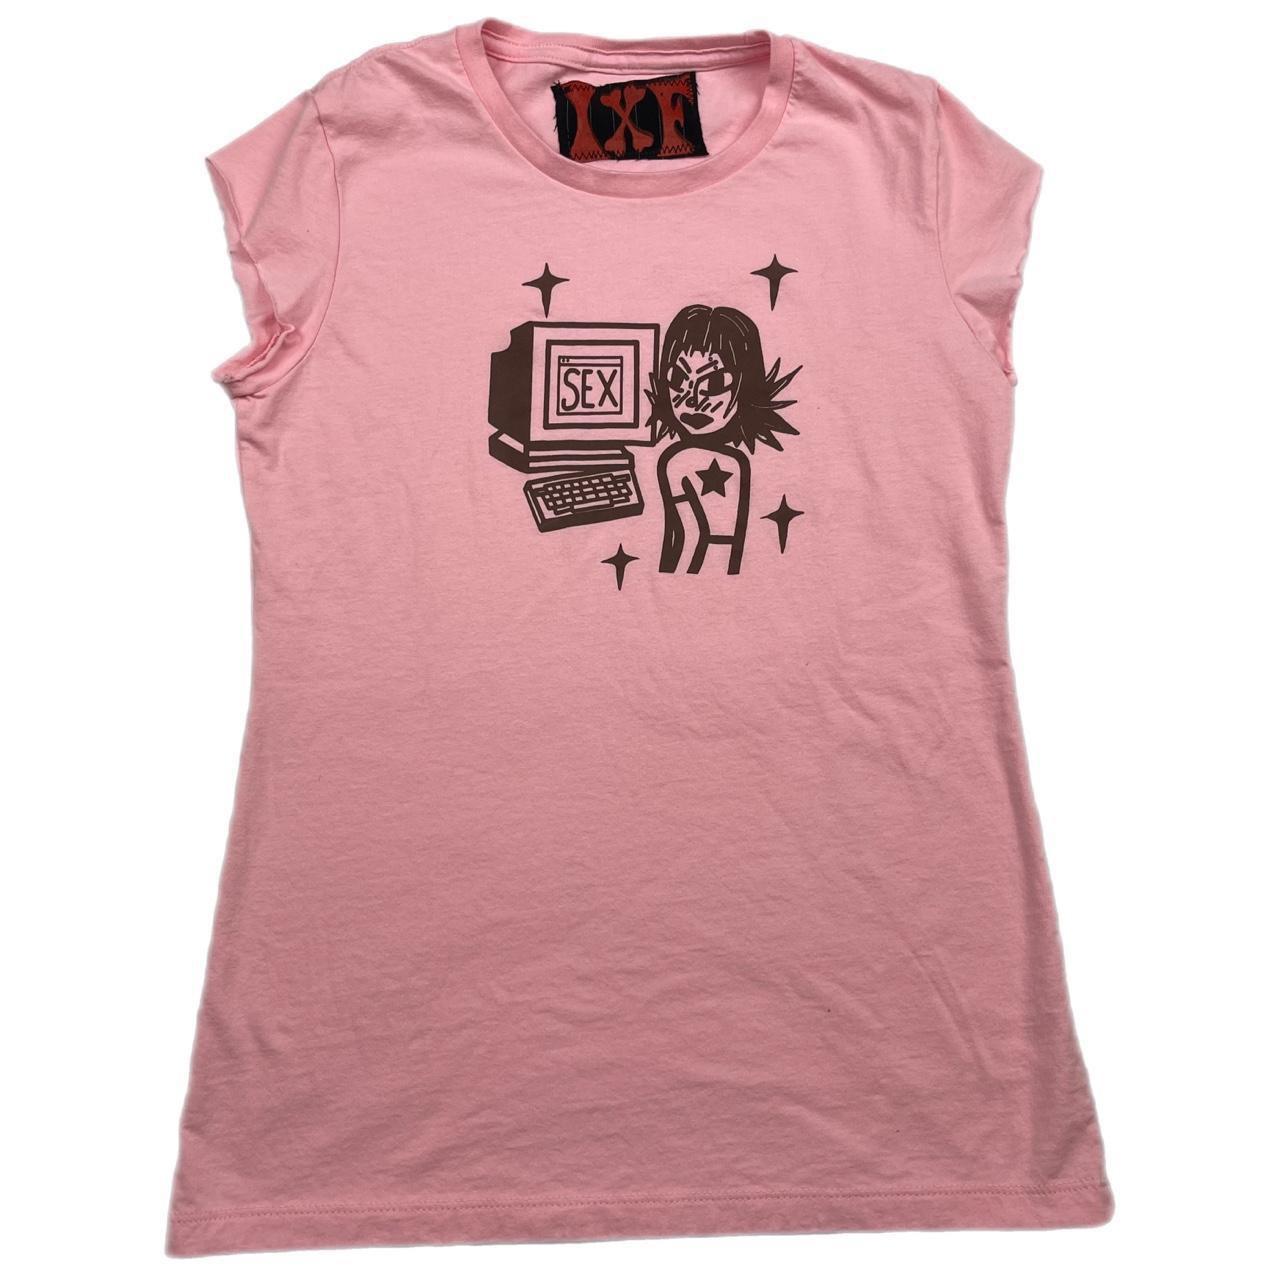 Women's Brown and Pink T-shirt